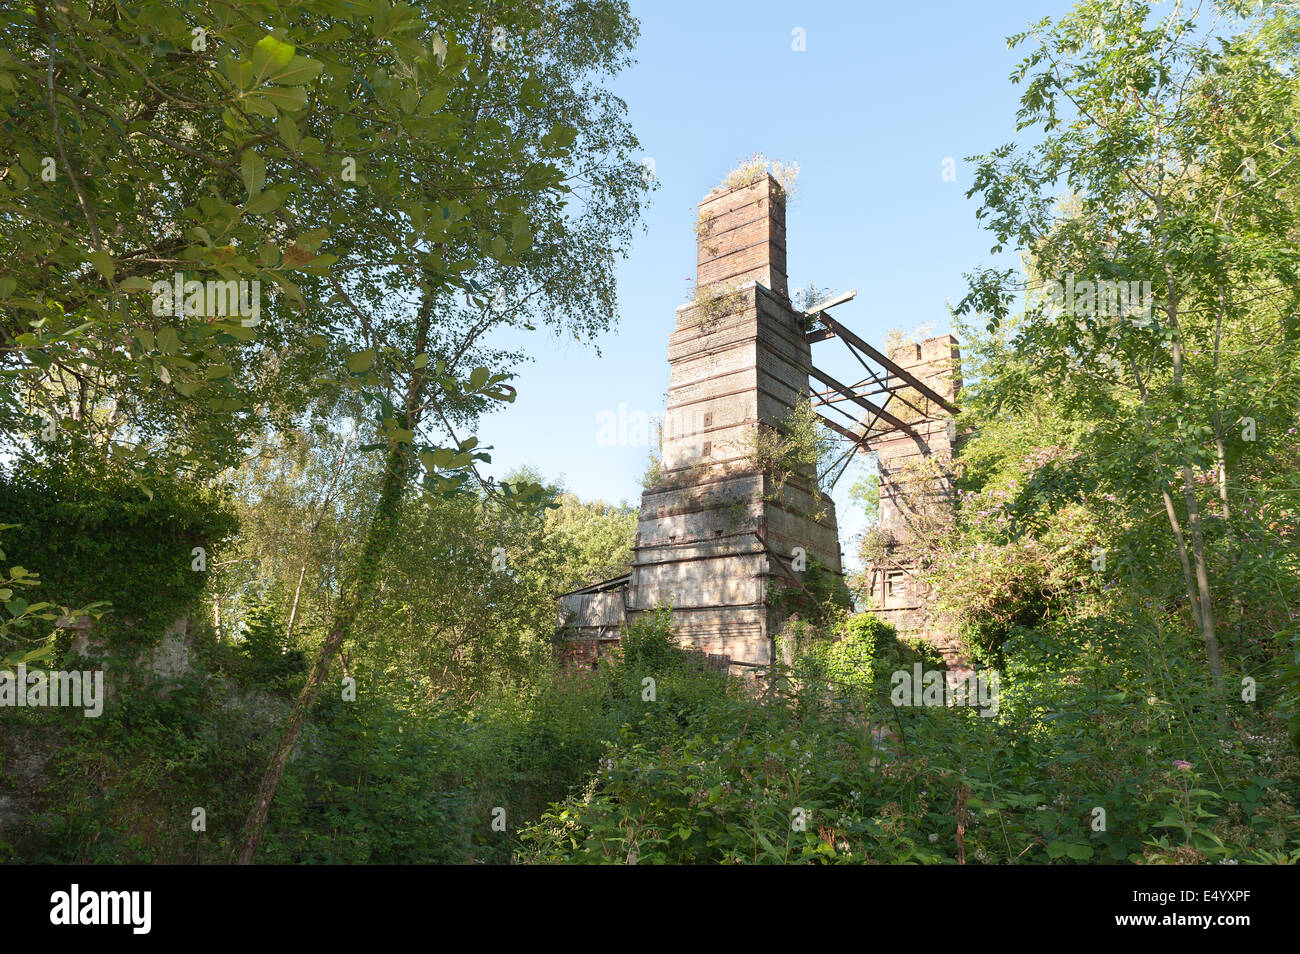 Surrey county equivalent of a tin mine derelict lime works tower hidden by the trees stand against skyline Stock Photo